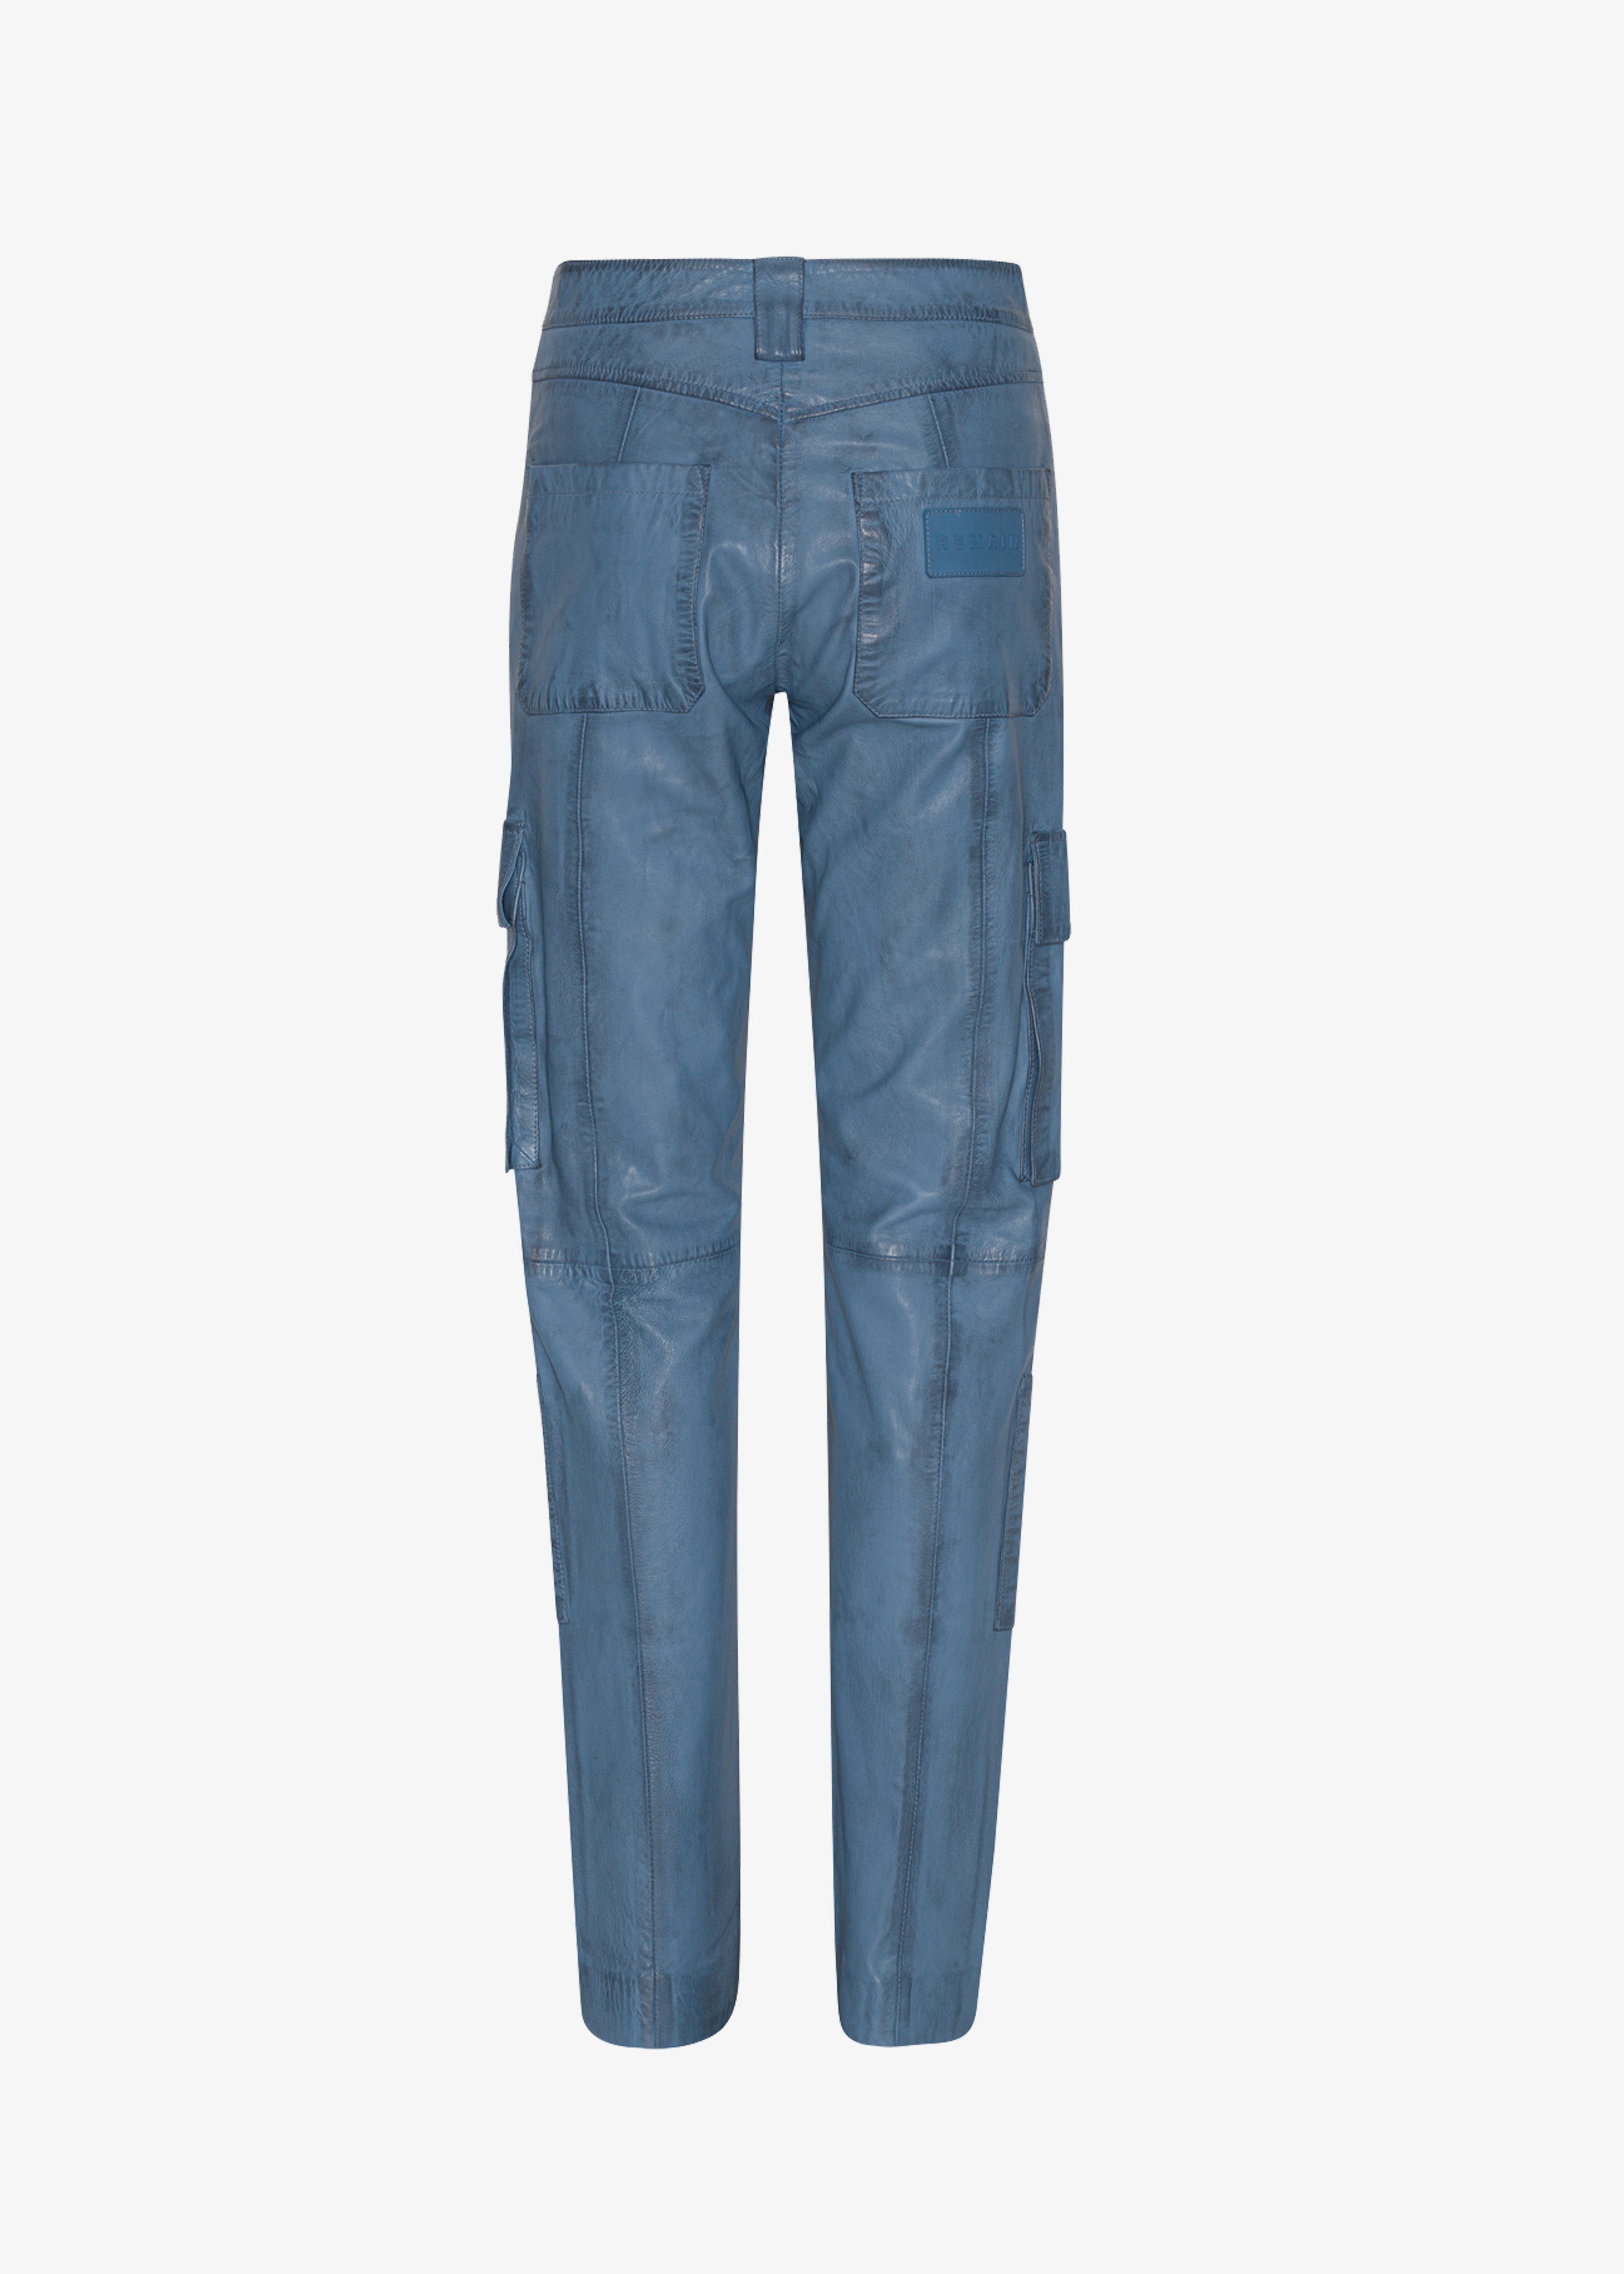 REMAIN Leather Fitted Pants - Coronet Blue - 3